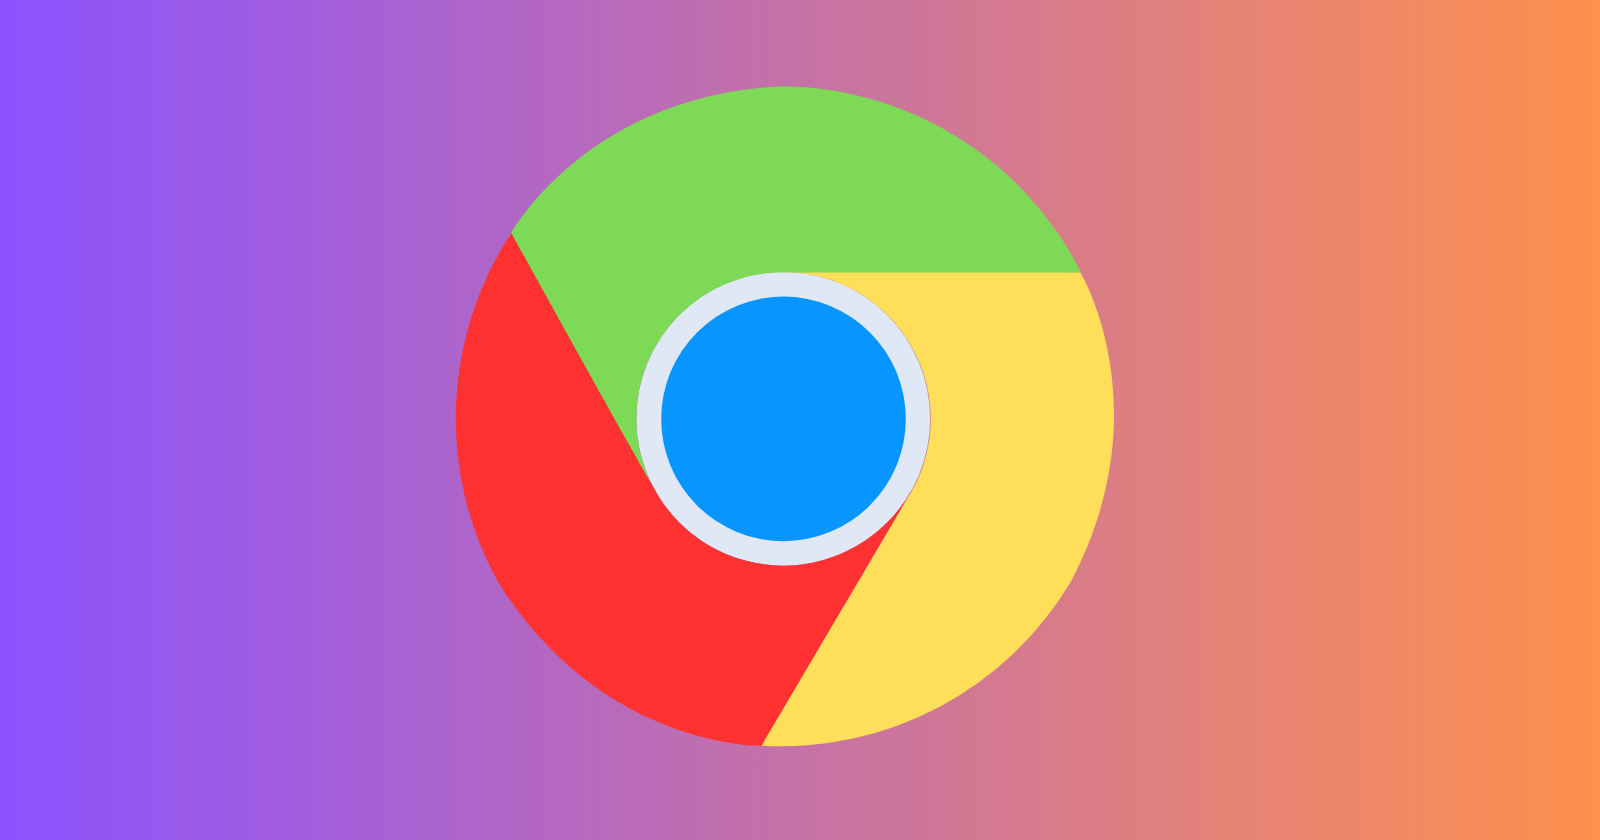 Google Chrome will make it easy to screenshot videos with new 'Save video frame' option